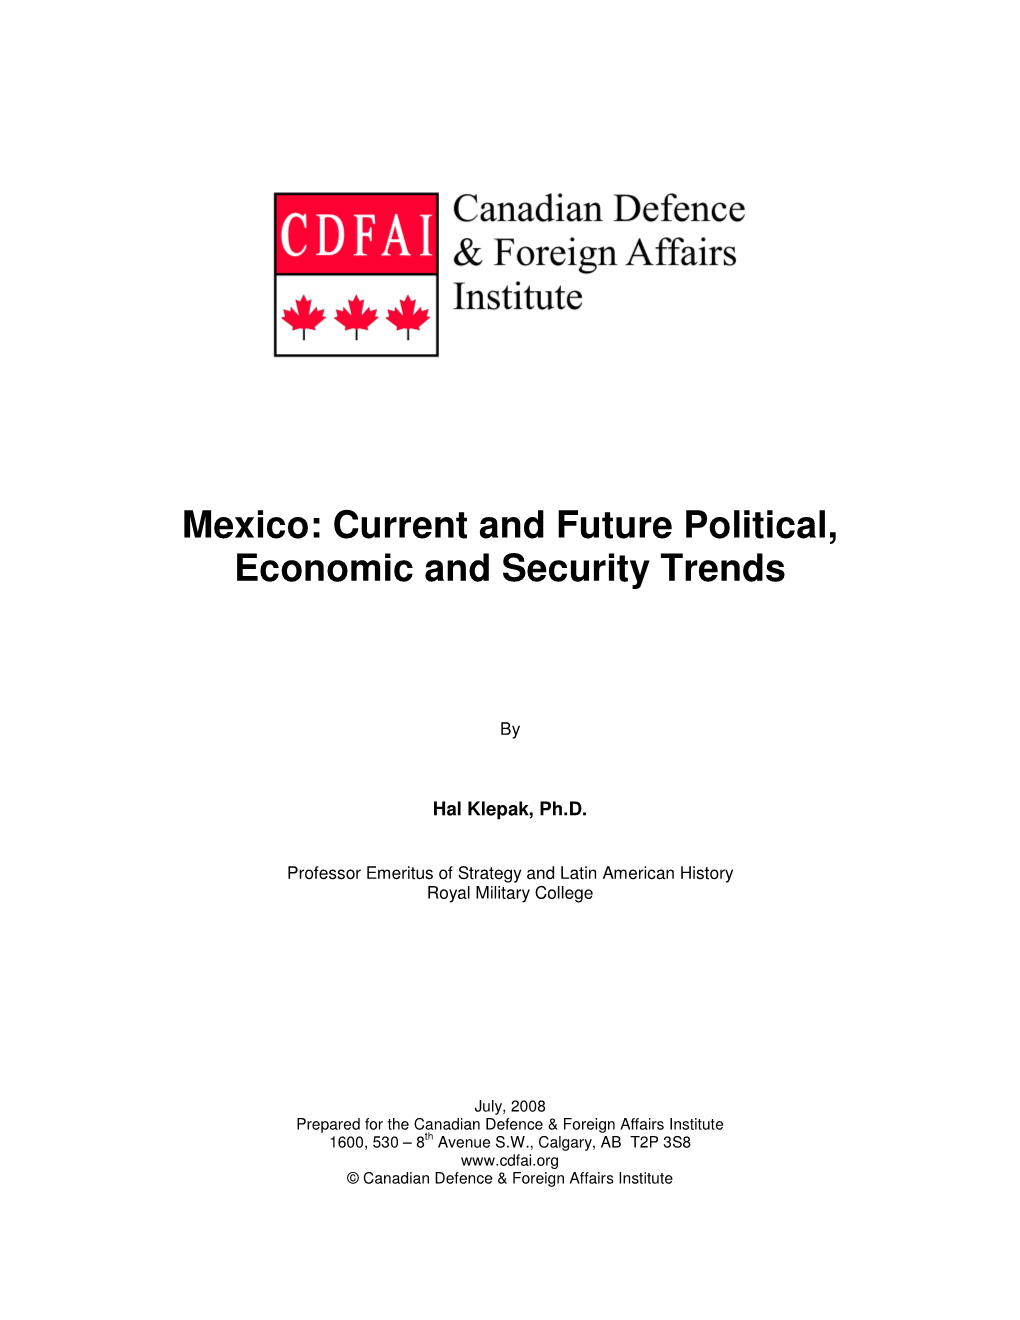 Mexico: Current and Future Political, Economic and Security Trends